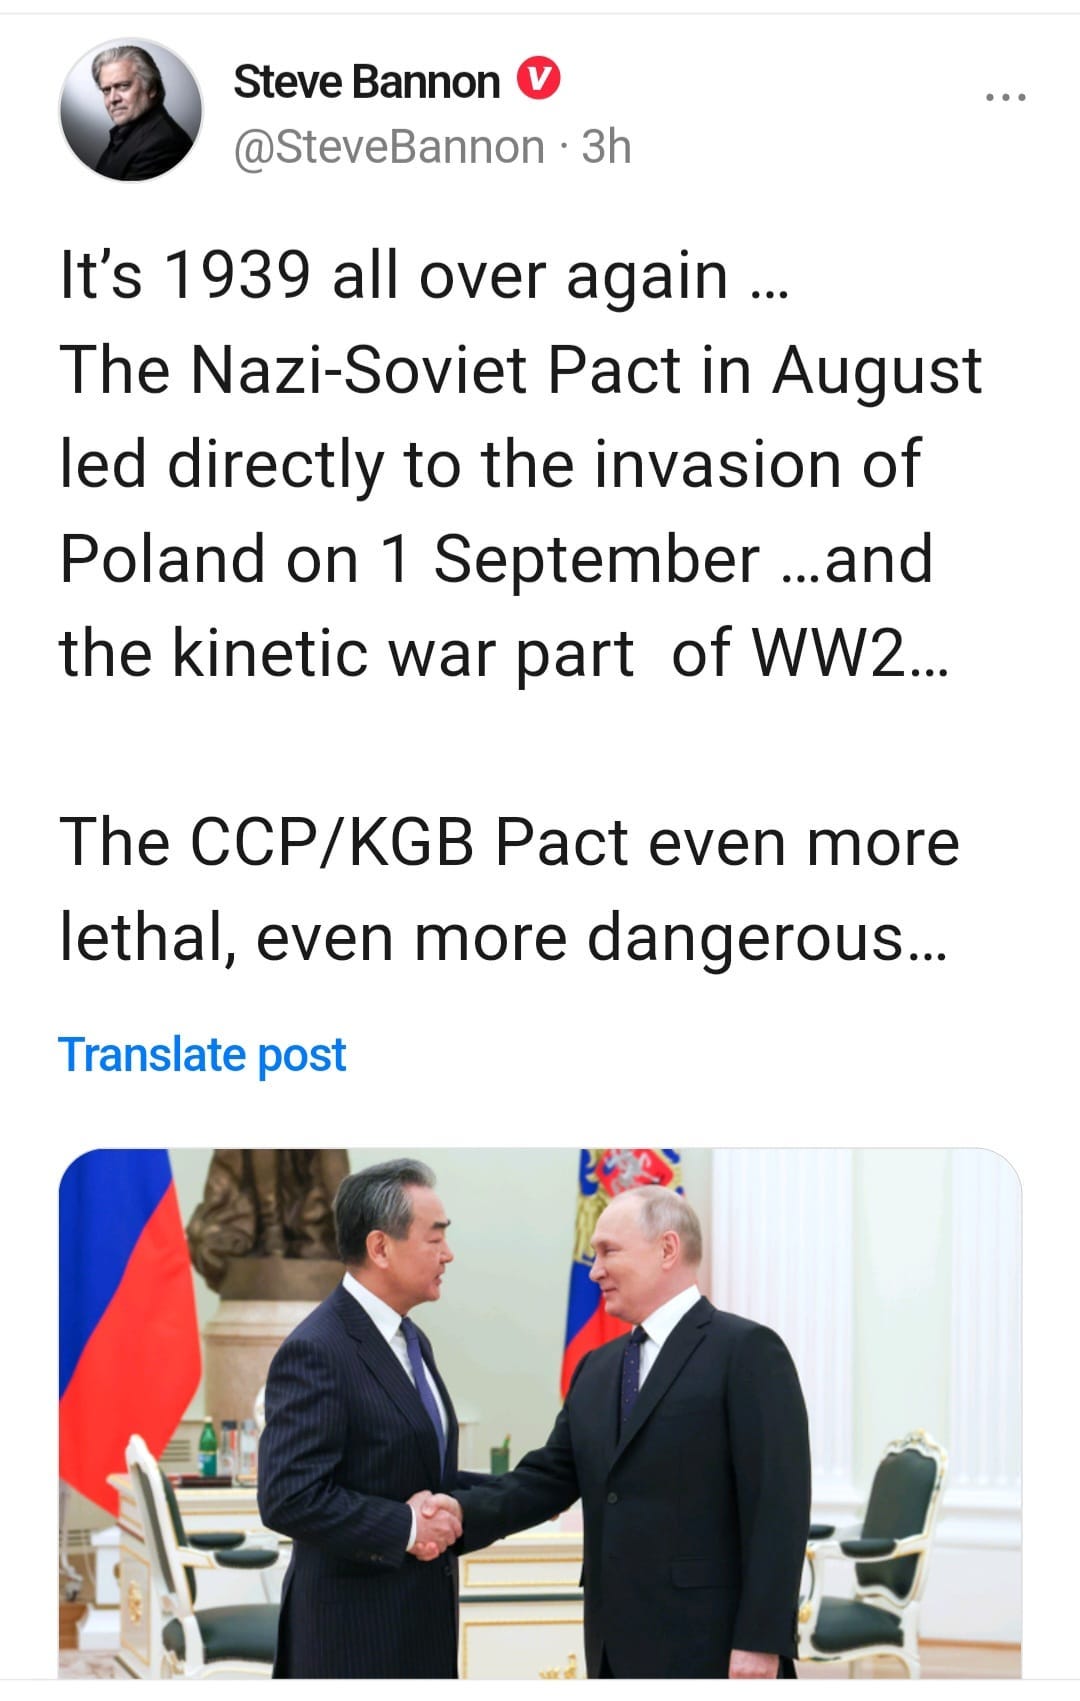 May be an image of 3 people, people standing and text that says 'Steve Bannon @SteveBannon 3h It's 1939 all over again... The Nazi-Soviet Nazi- Pact in August led directly to the invasion of Poland on 1 September ...and the kinetic war part of WW2... The CCP/KGB Pact even more lethal, even more dangerous... Translate post'